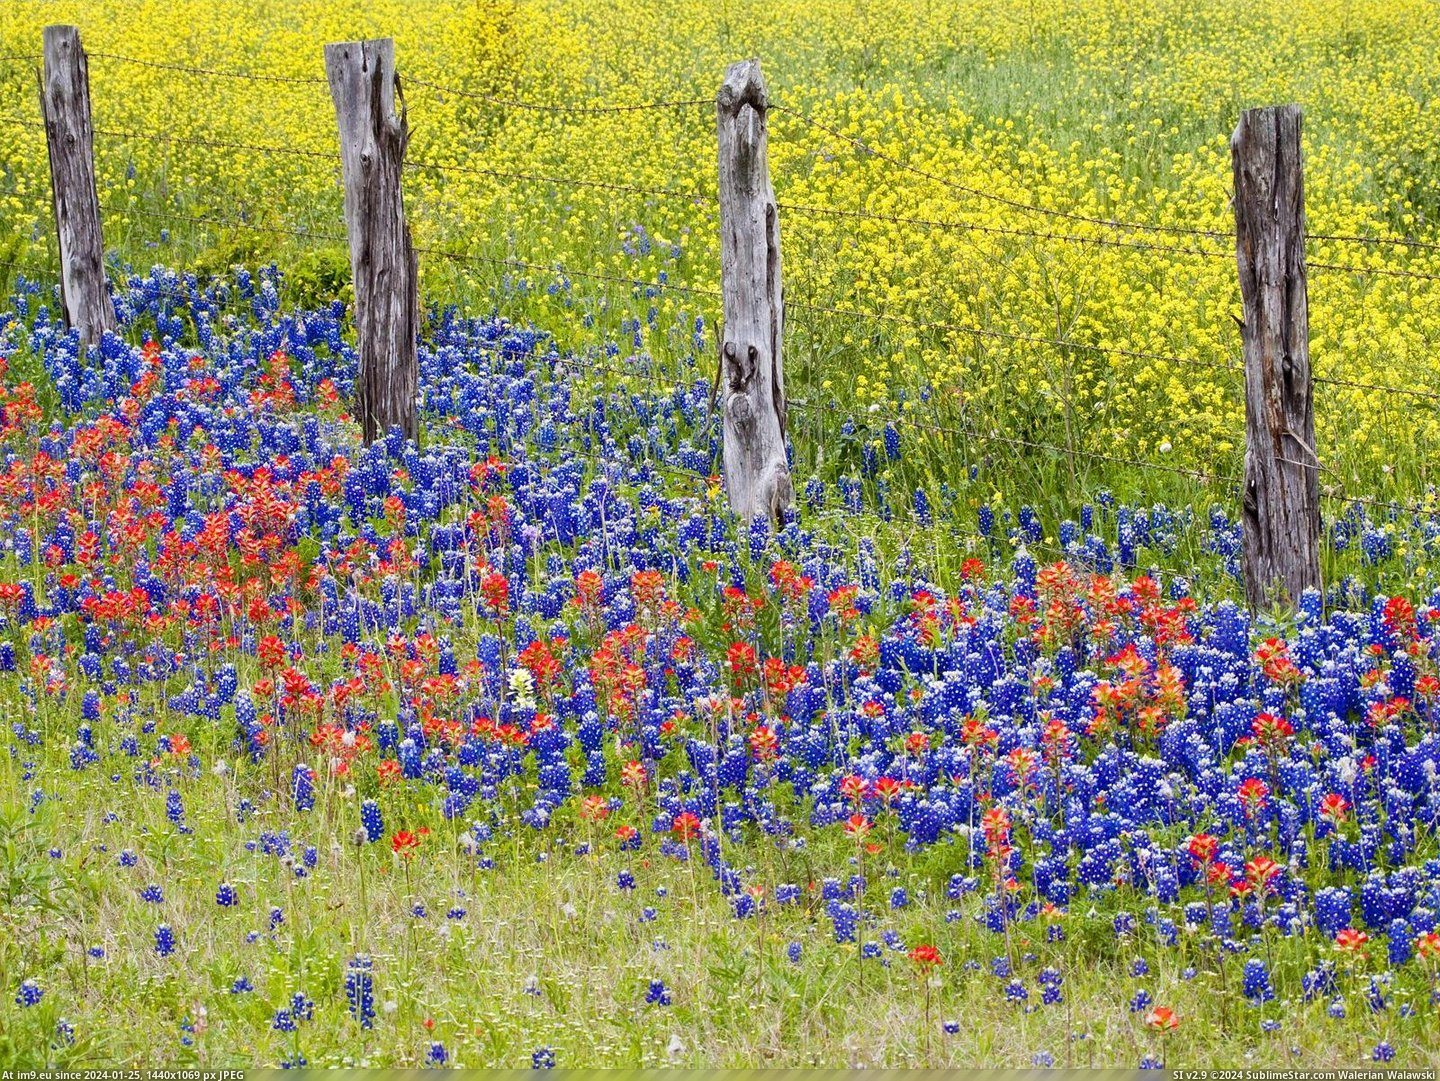 Wildflowers Along a Fenceline, Texas (in Beautiful photos and wallpapers)